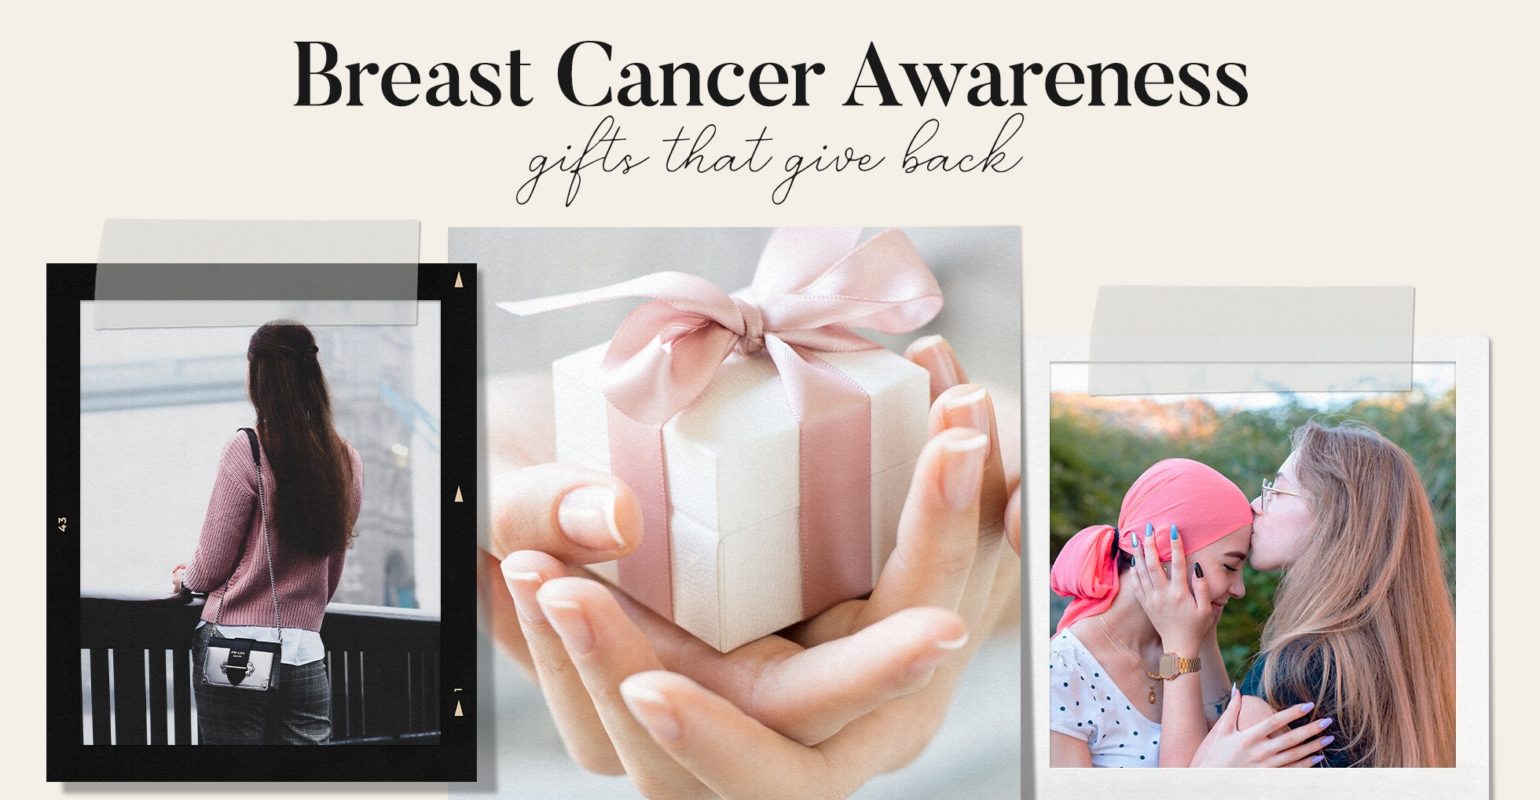 15 Thoughtful Breast Cancer Awareness Gifts that Give Back